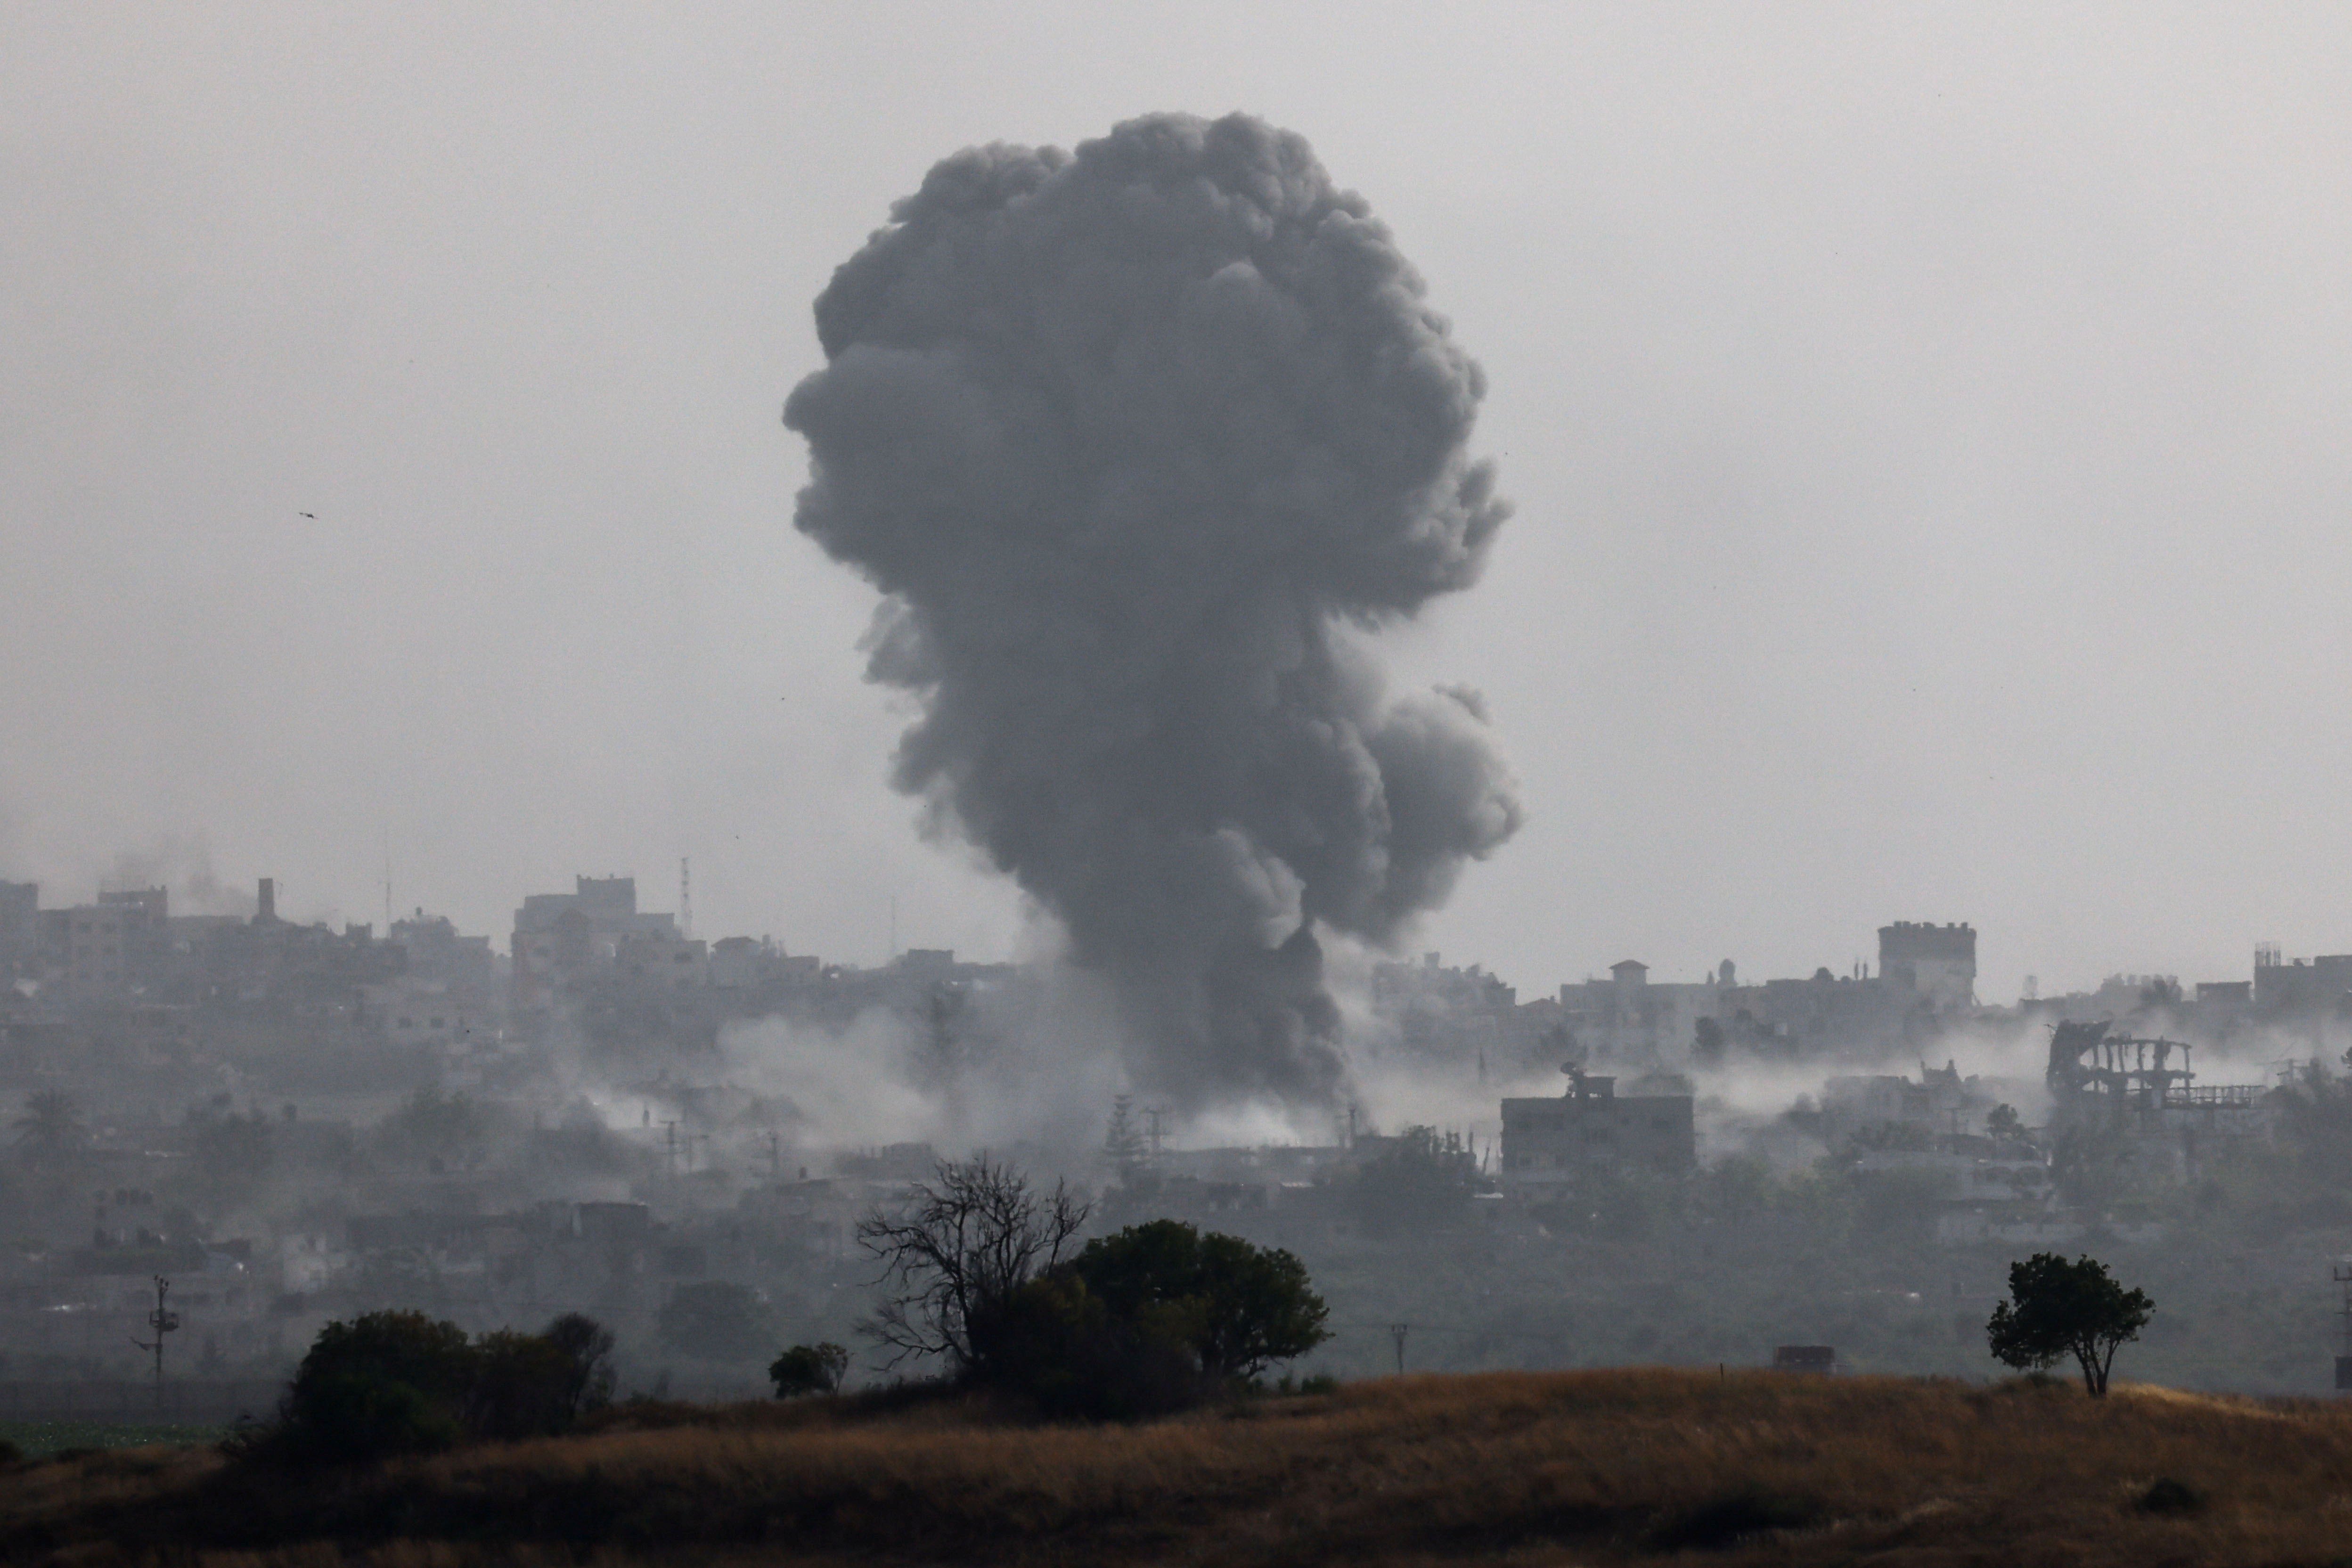 Smoke rises from an explosion in Gaza